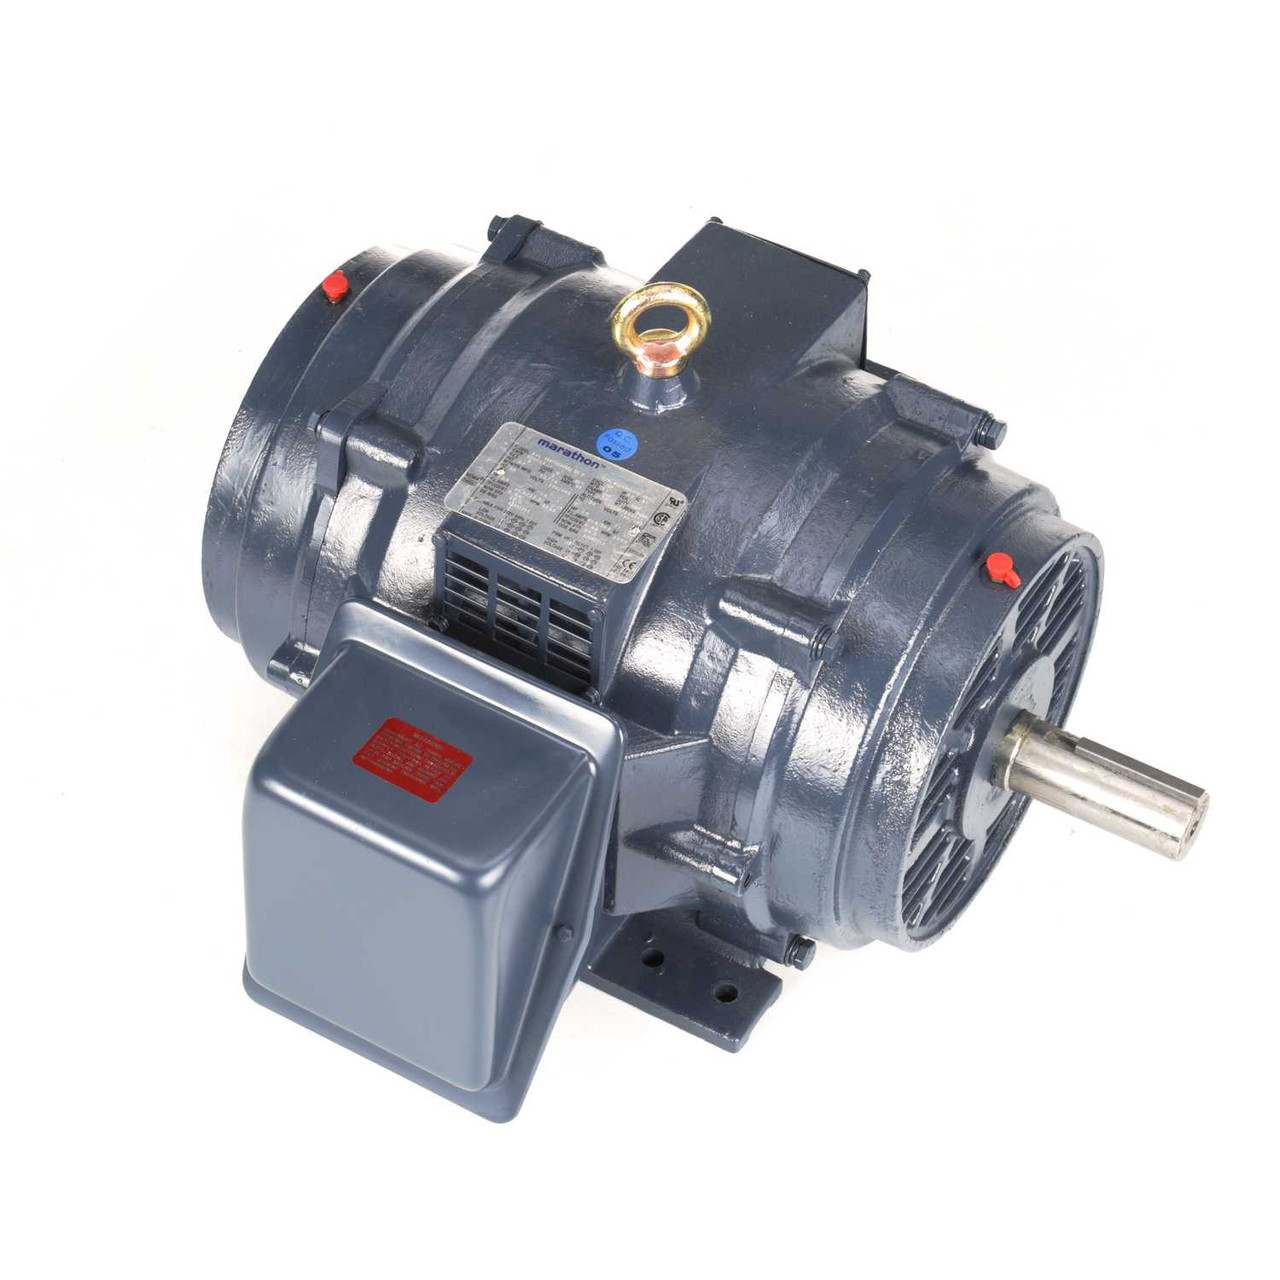 GT0061 Globetrotter Three Phase Dripproof Motor 20 HP